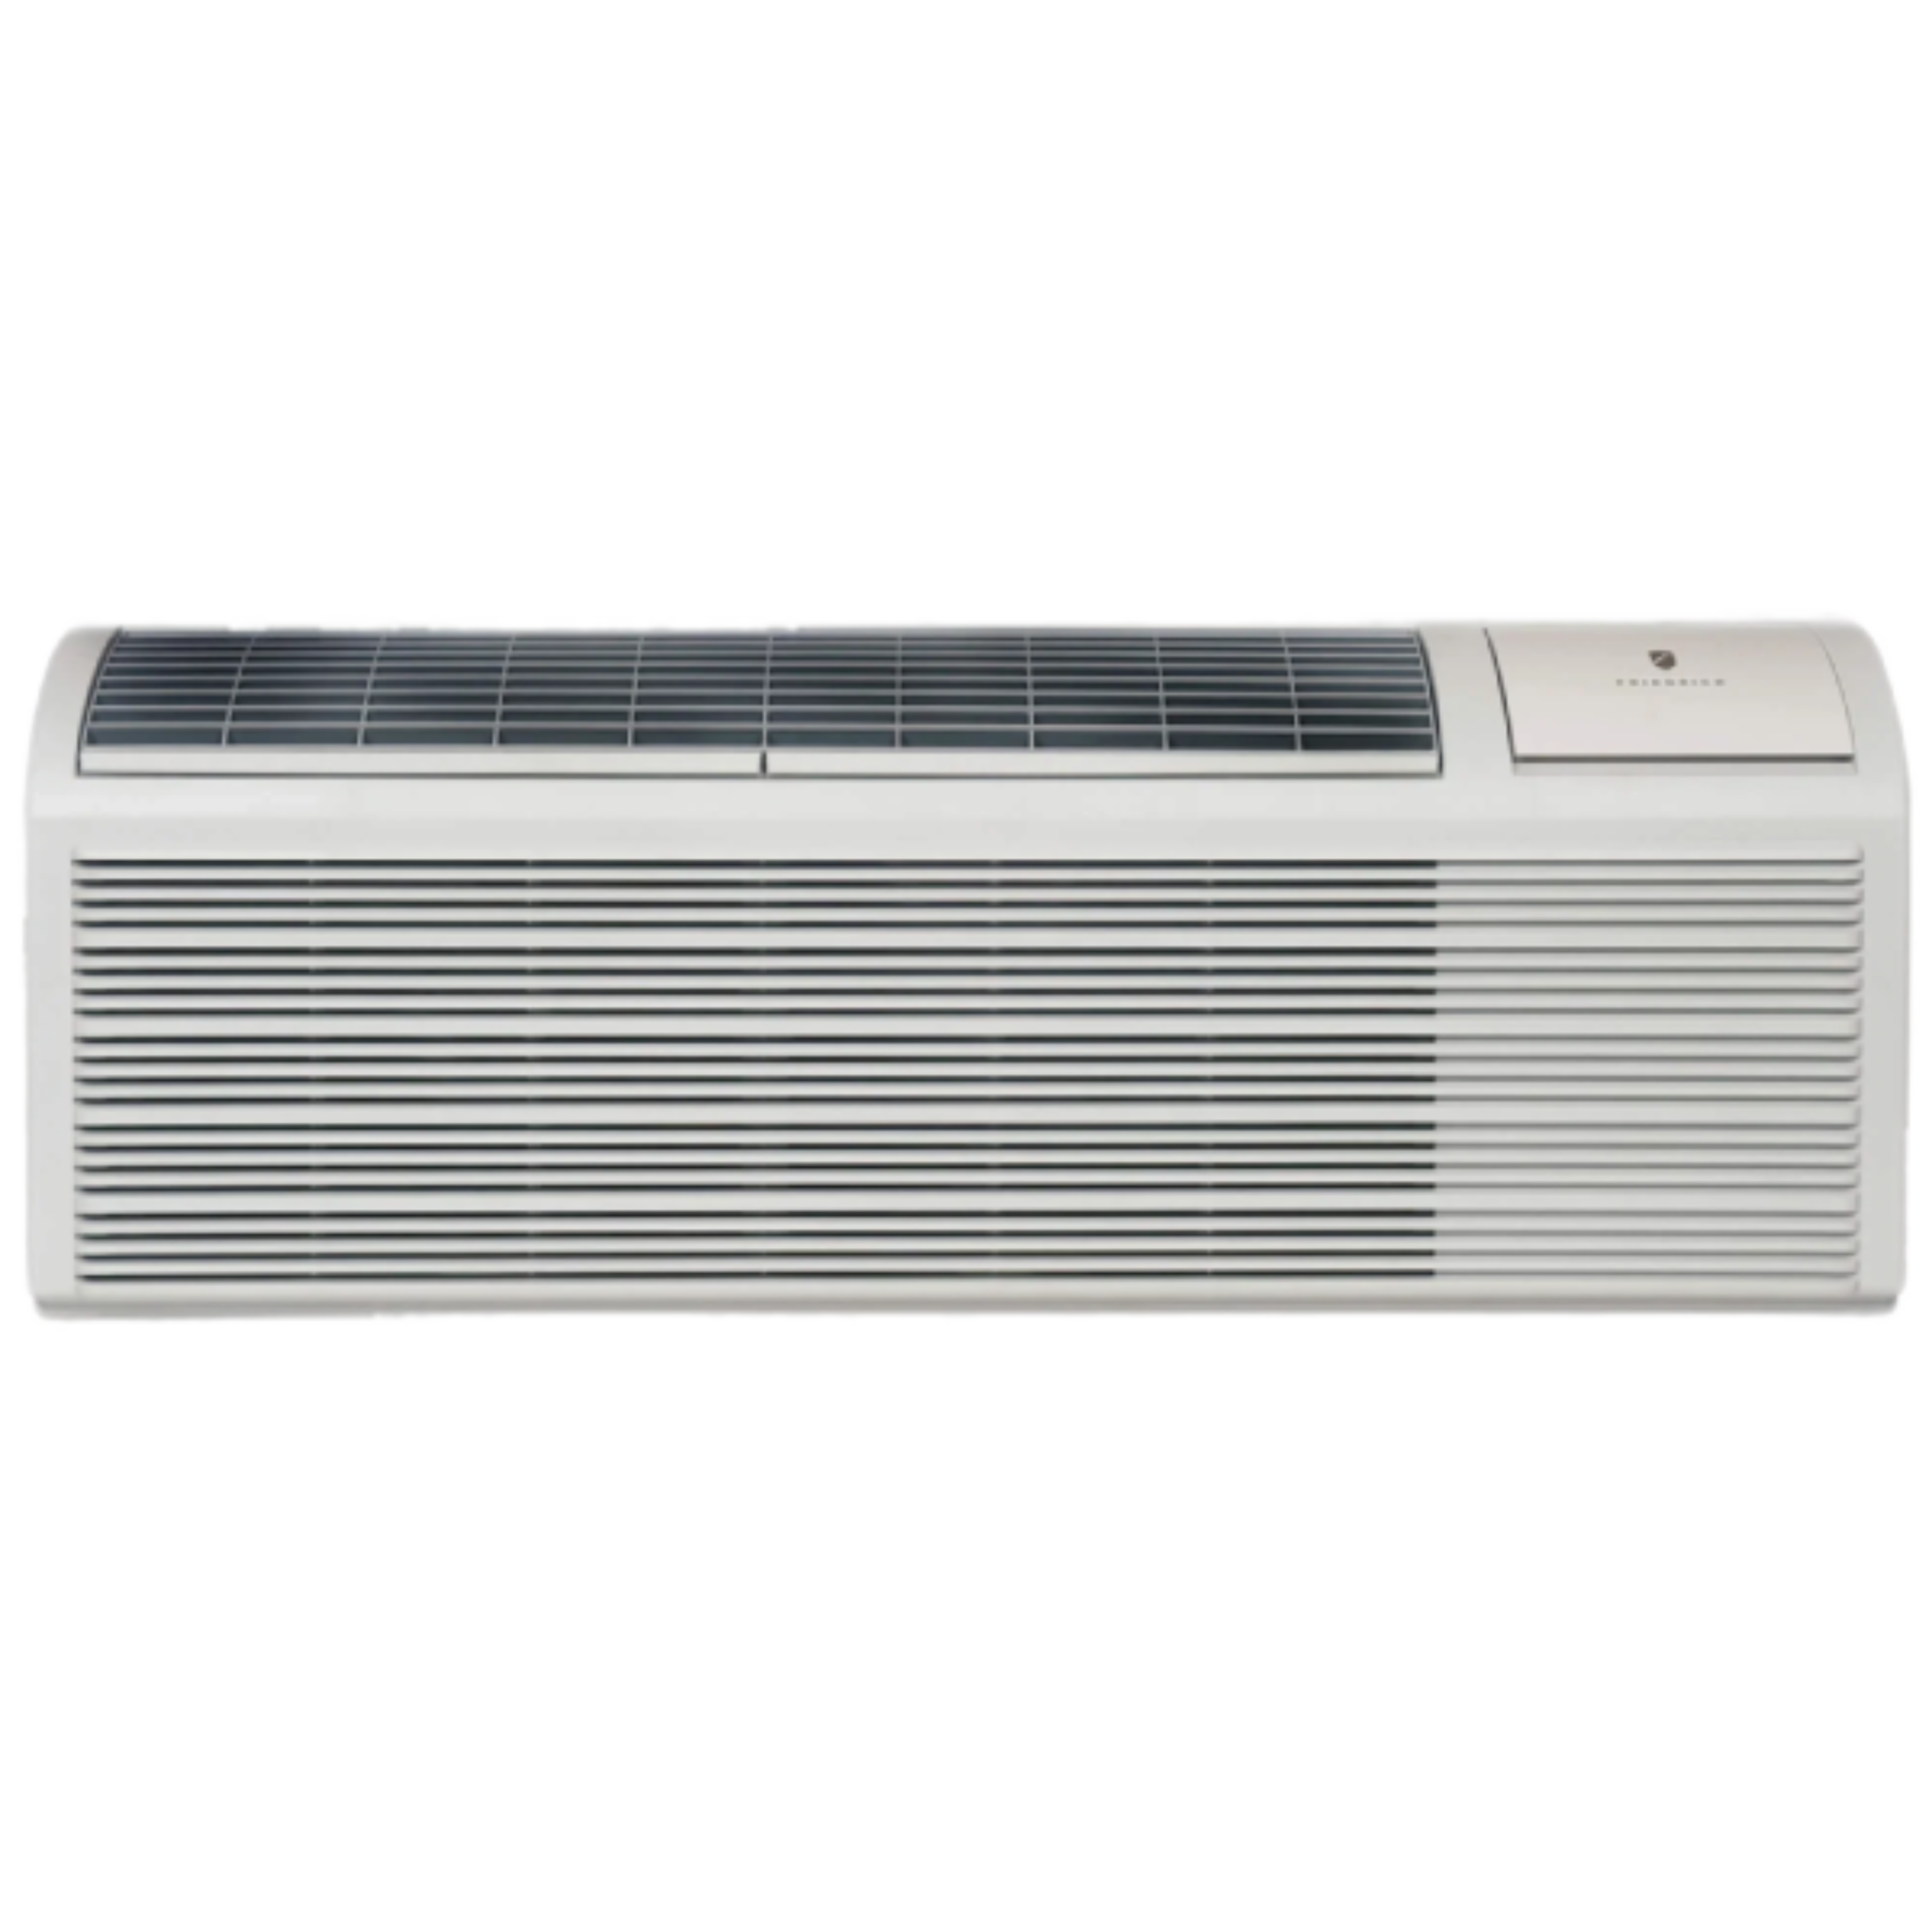 Friedrich ZoneAire Select Packaged Terminal Air Conditioner with Electric Heat Model PZE12K3SB, 11.4 EER, 230 V, 470 CFM, 12000 BTU